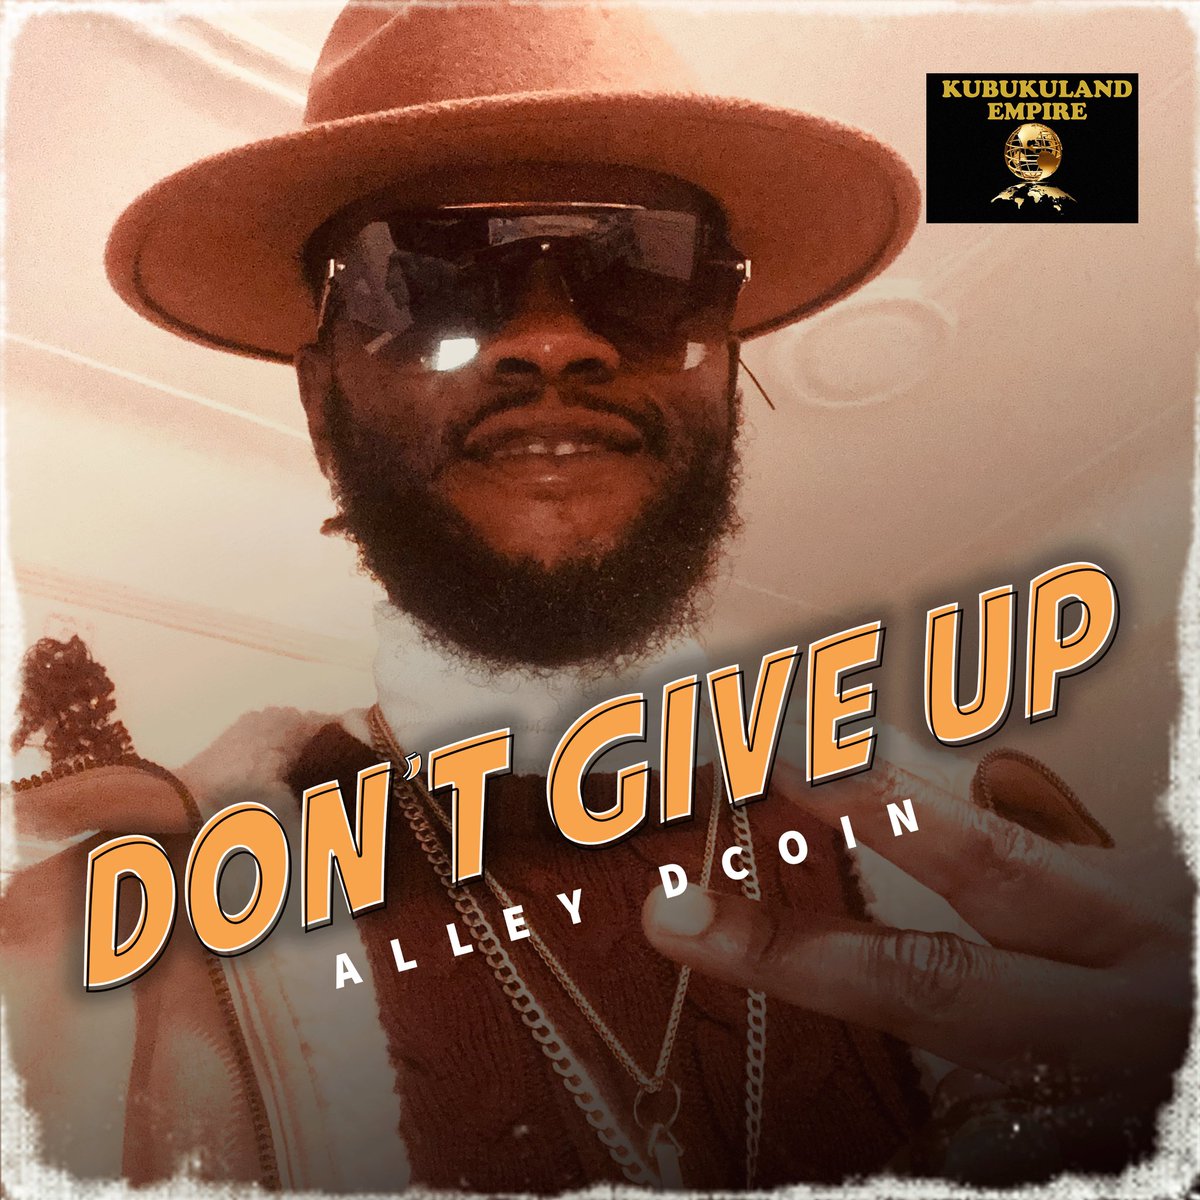 Don’t give up by Alley Dcoin is OUT NOW!!! on all platforms🔥✊🏽🙏🏽 LINK on my bio ☝🏽